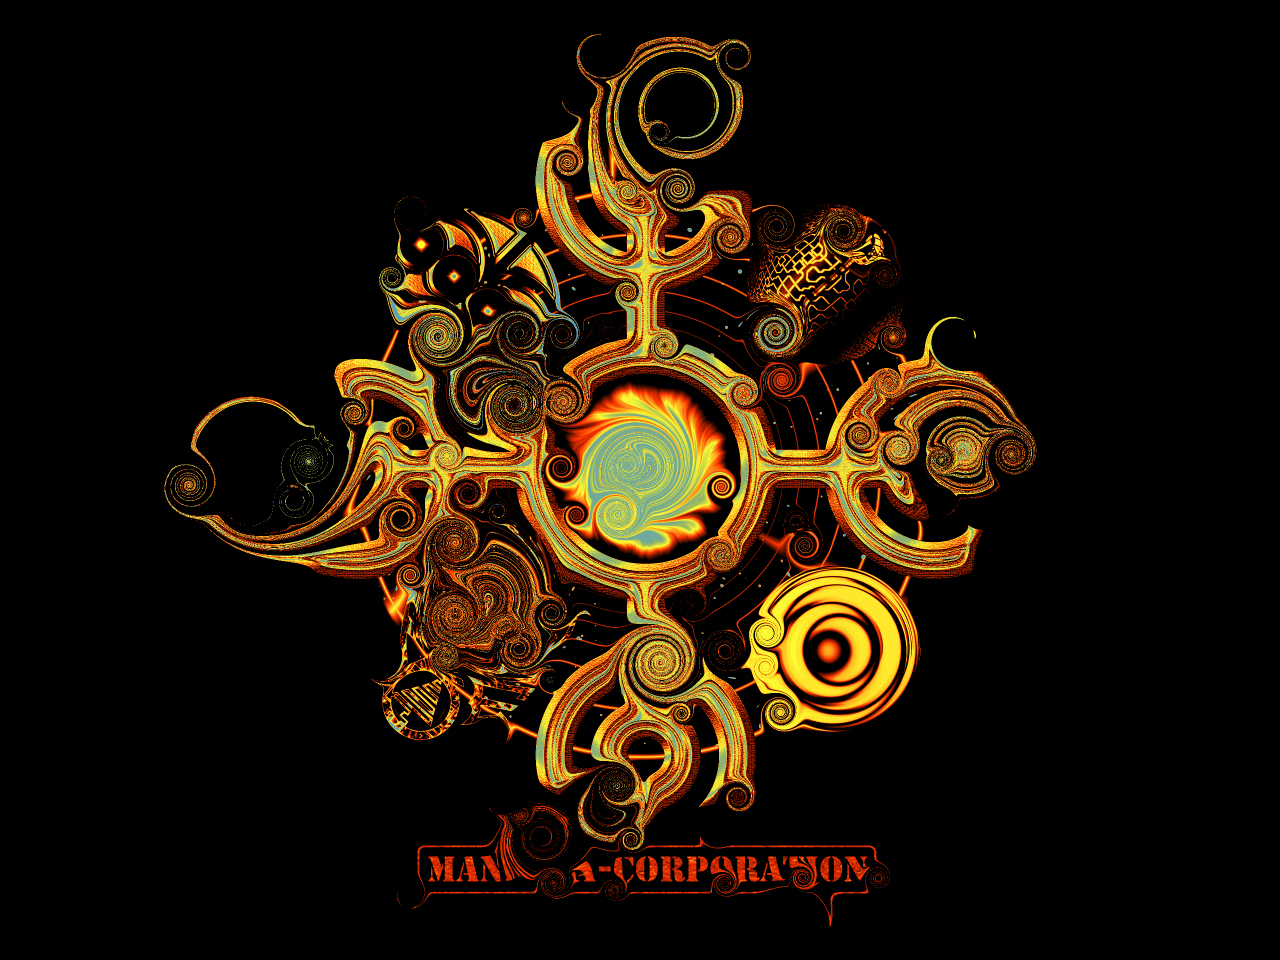 2013 mandala corporation all rights reserved